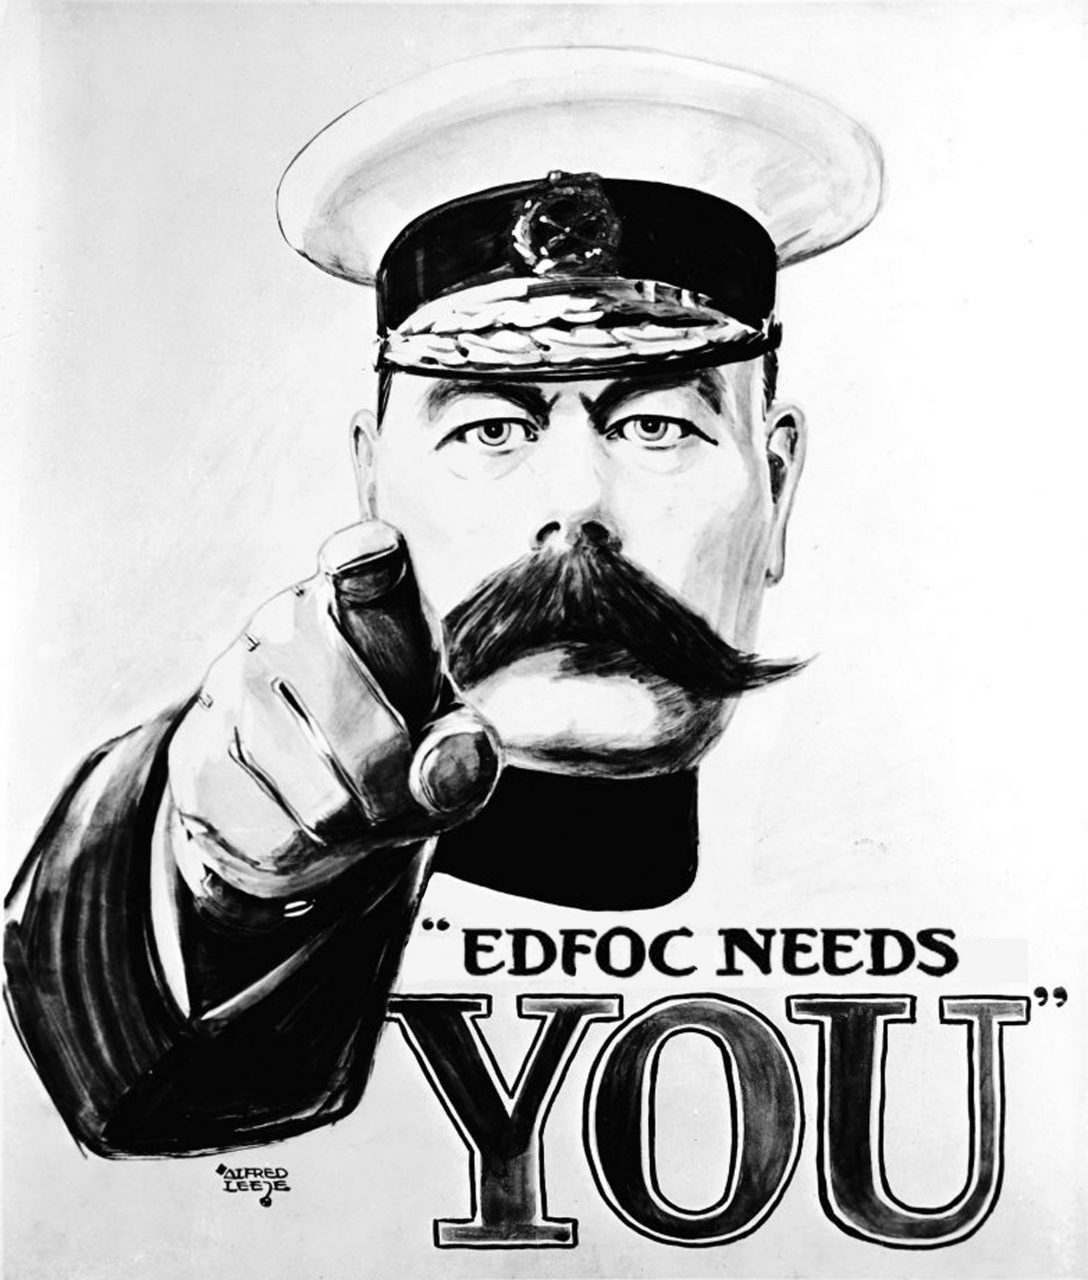 EdFoC Needs You: The image is based on the famous recruiting poster, a moustachioed man with a peaked hat points out at the viewer. The words "EdFoC Needs YOU" are displayed below his face.